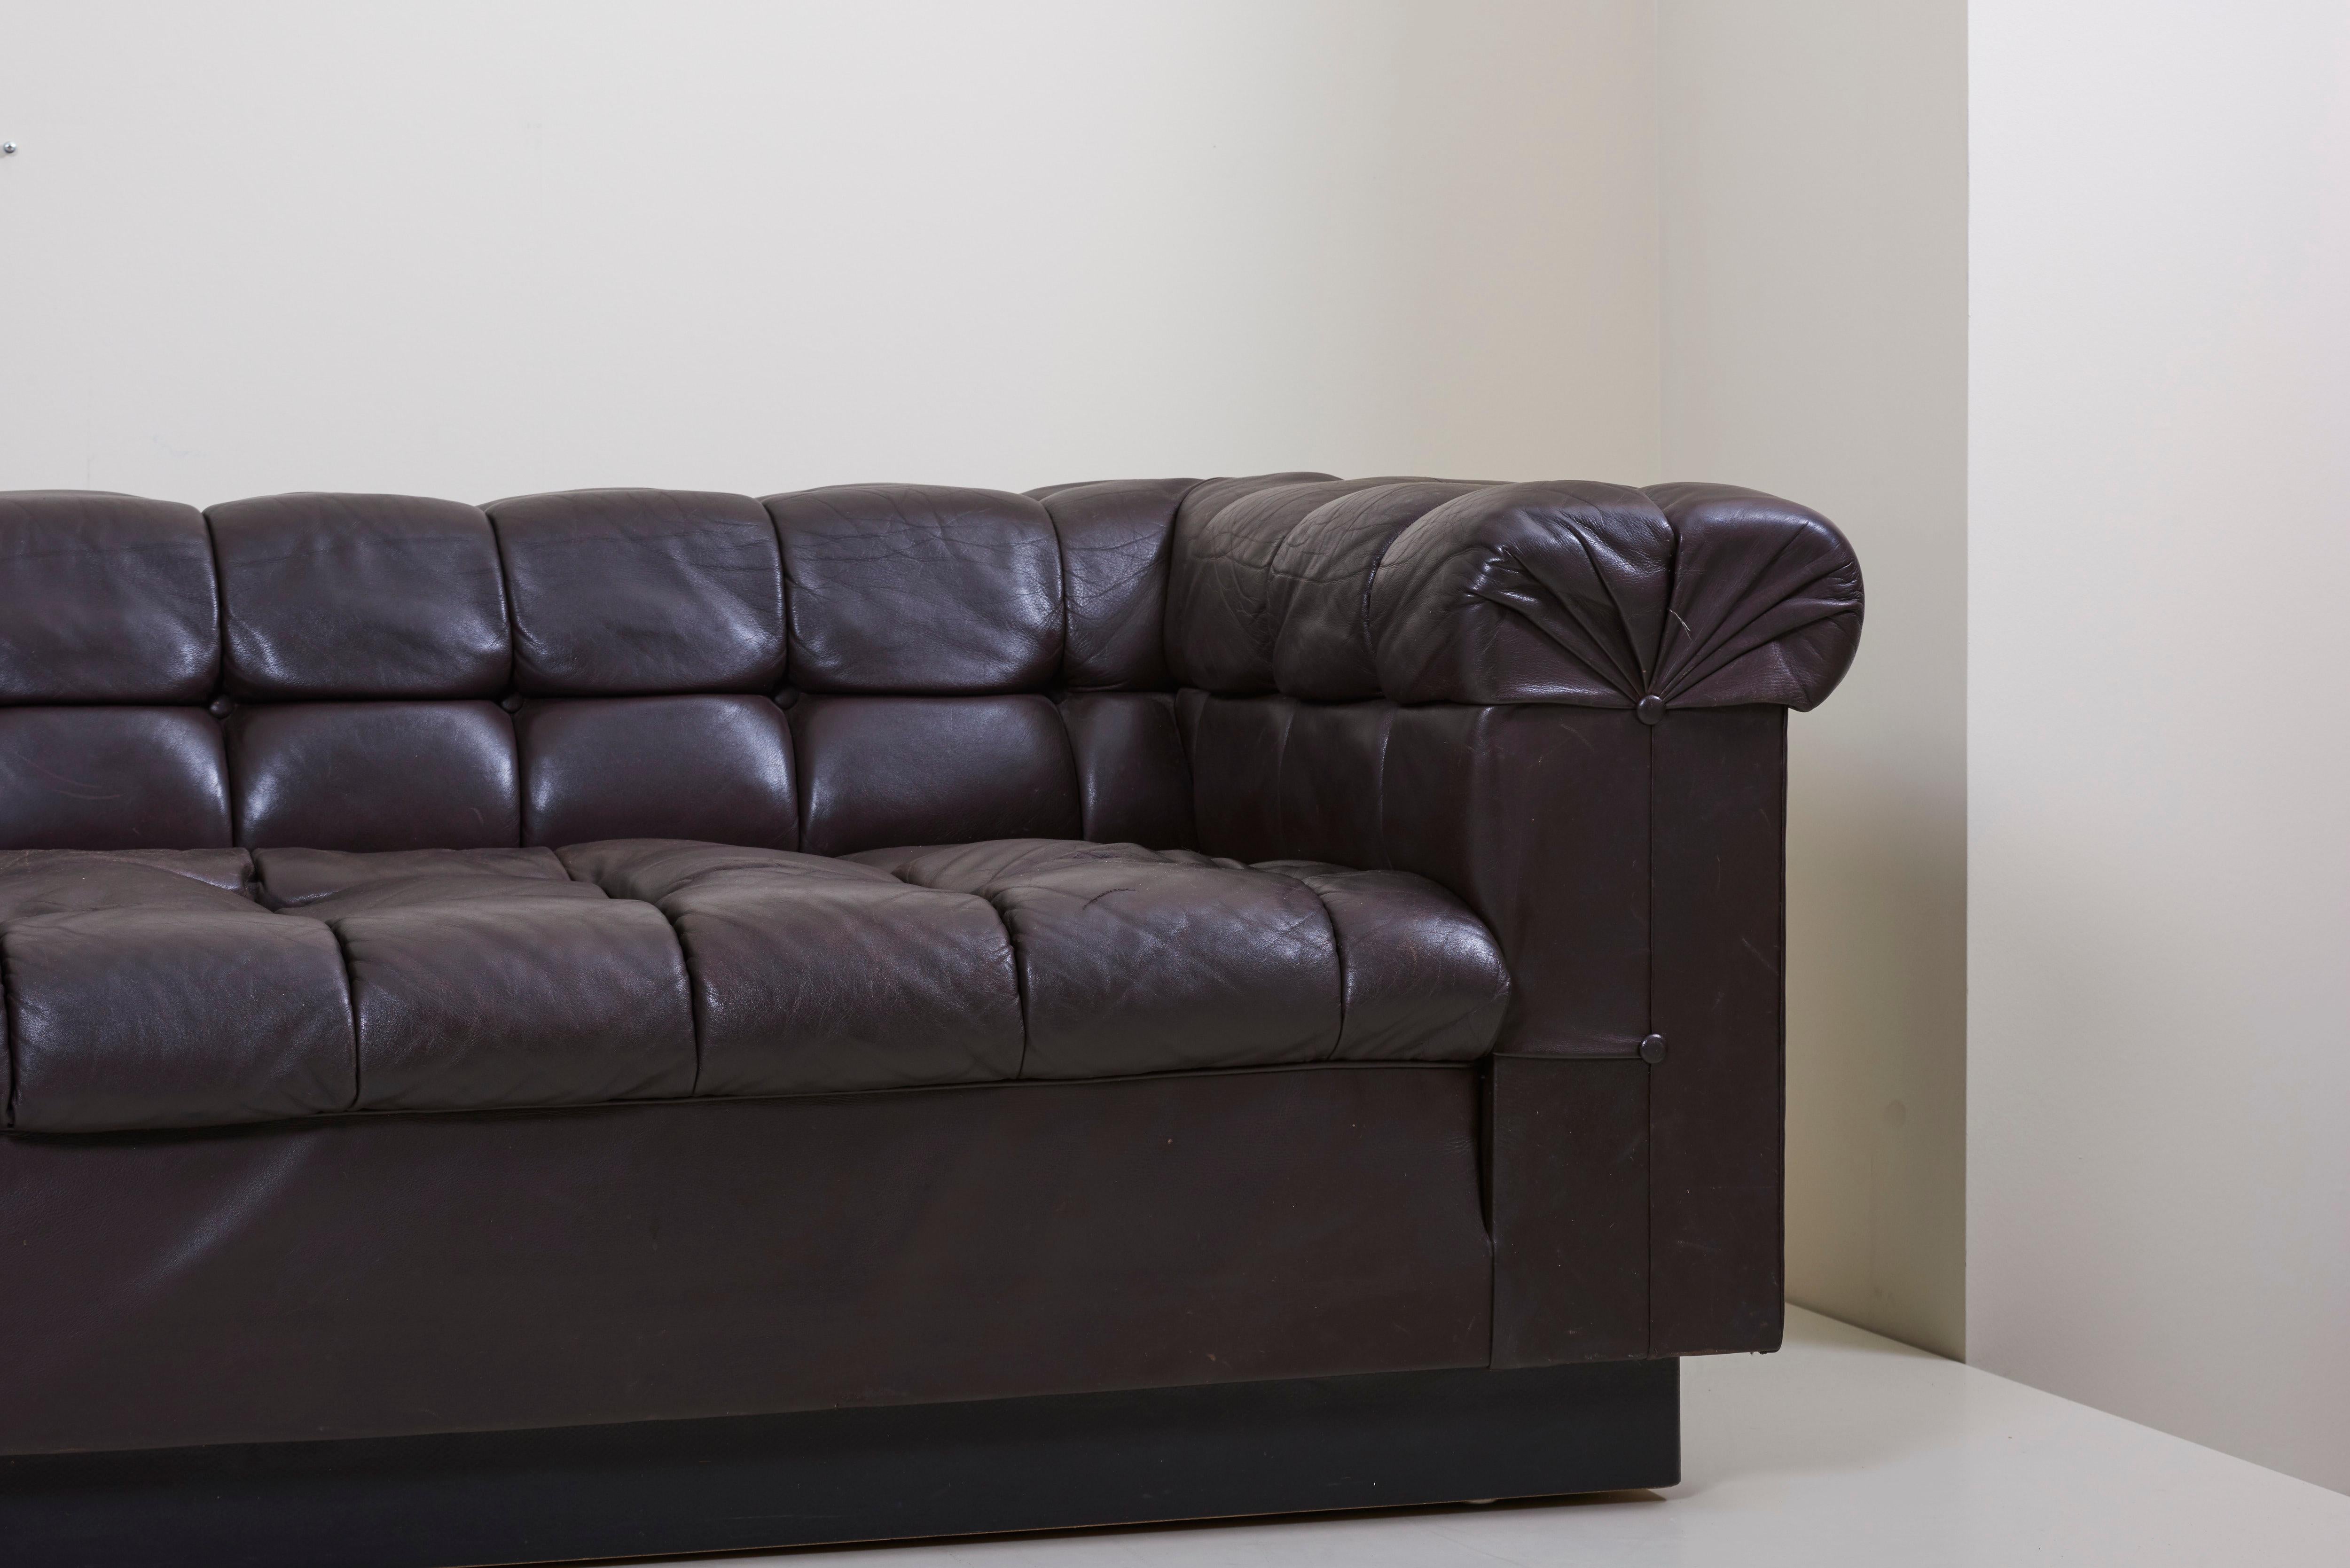 20th Century Party Sofa Model 5407 in Dark Brown Leather by Edward Wormley for Dunbar